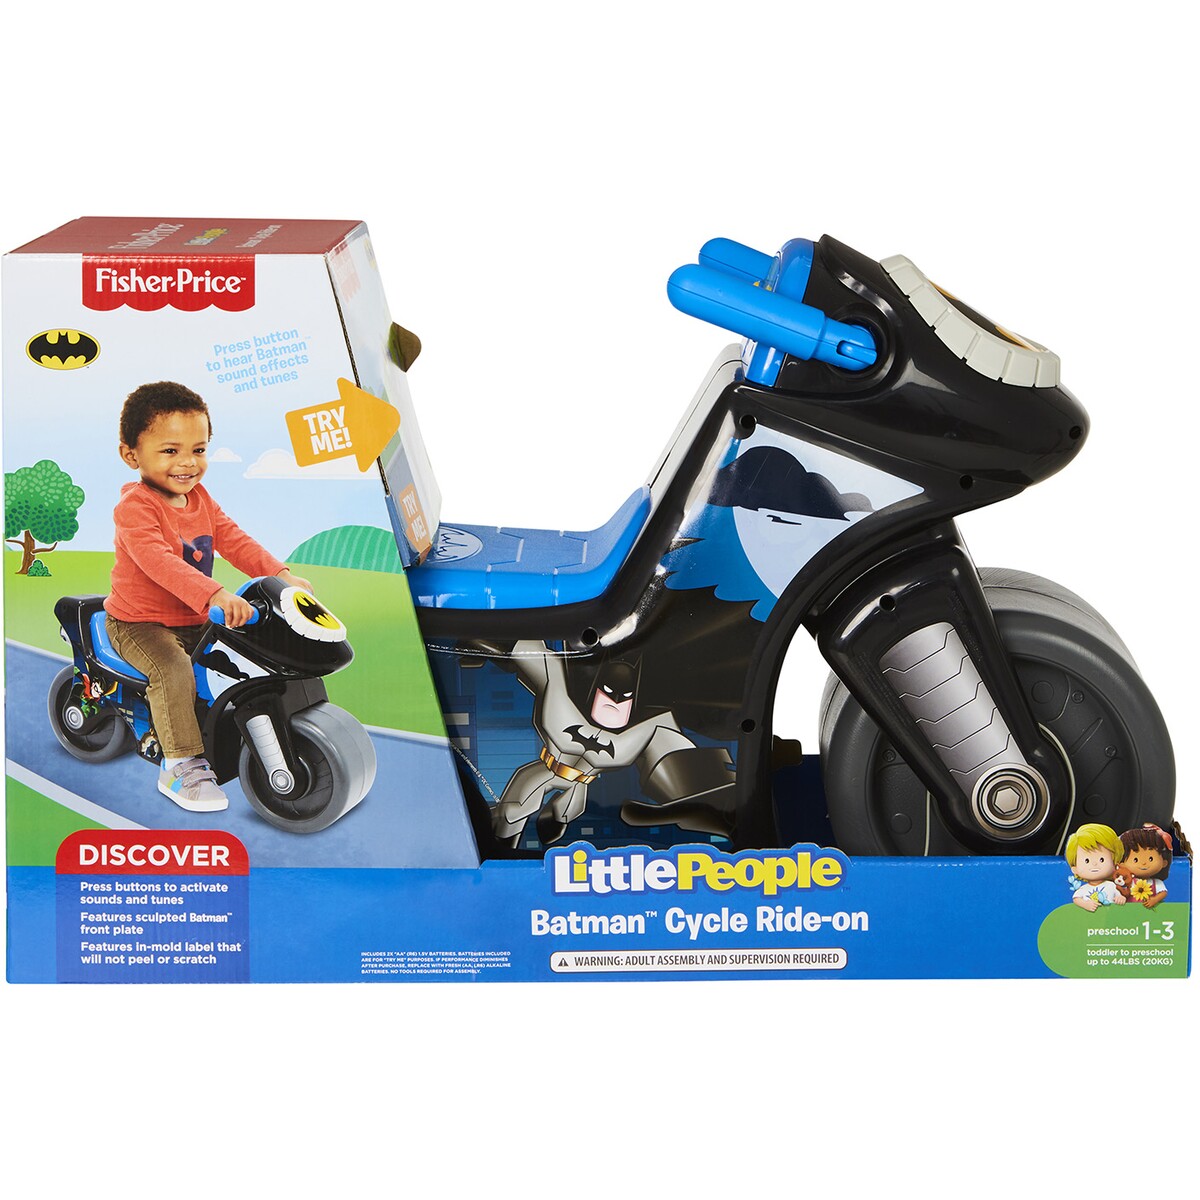 FISHER PRICE LITTLE PEOPLE BATMAN CYCLE RIDE ON